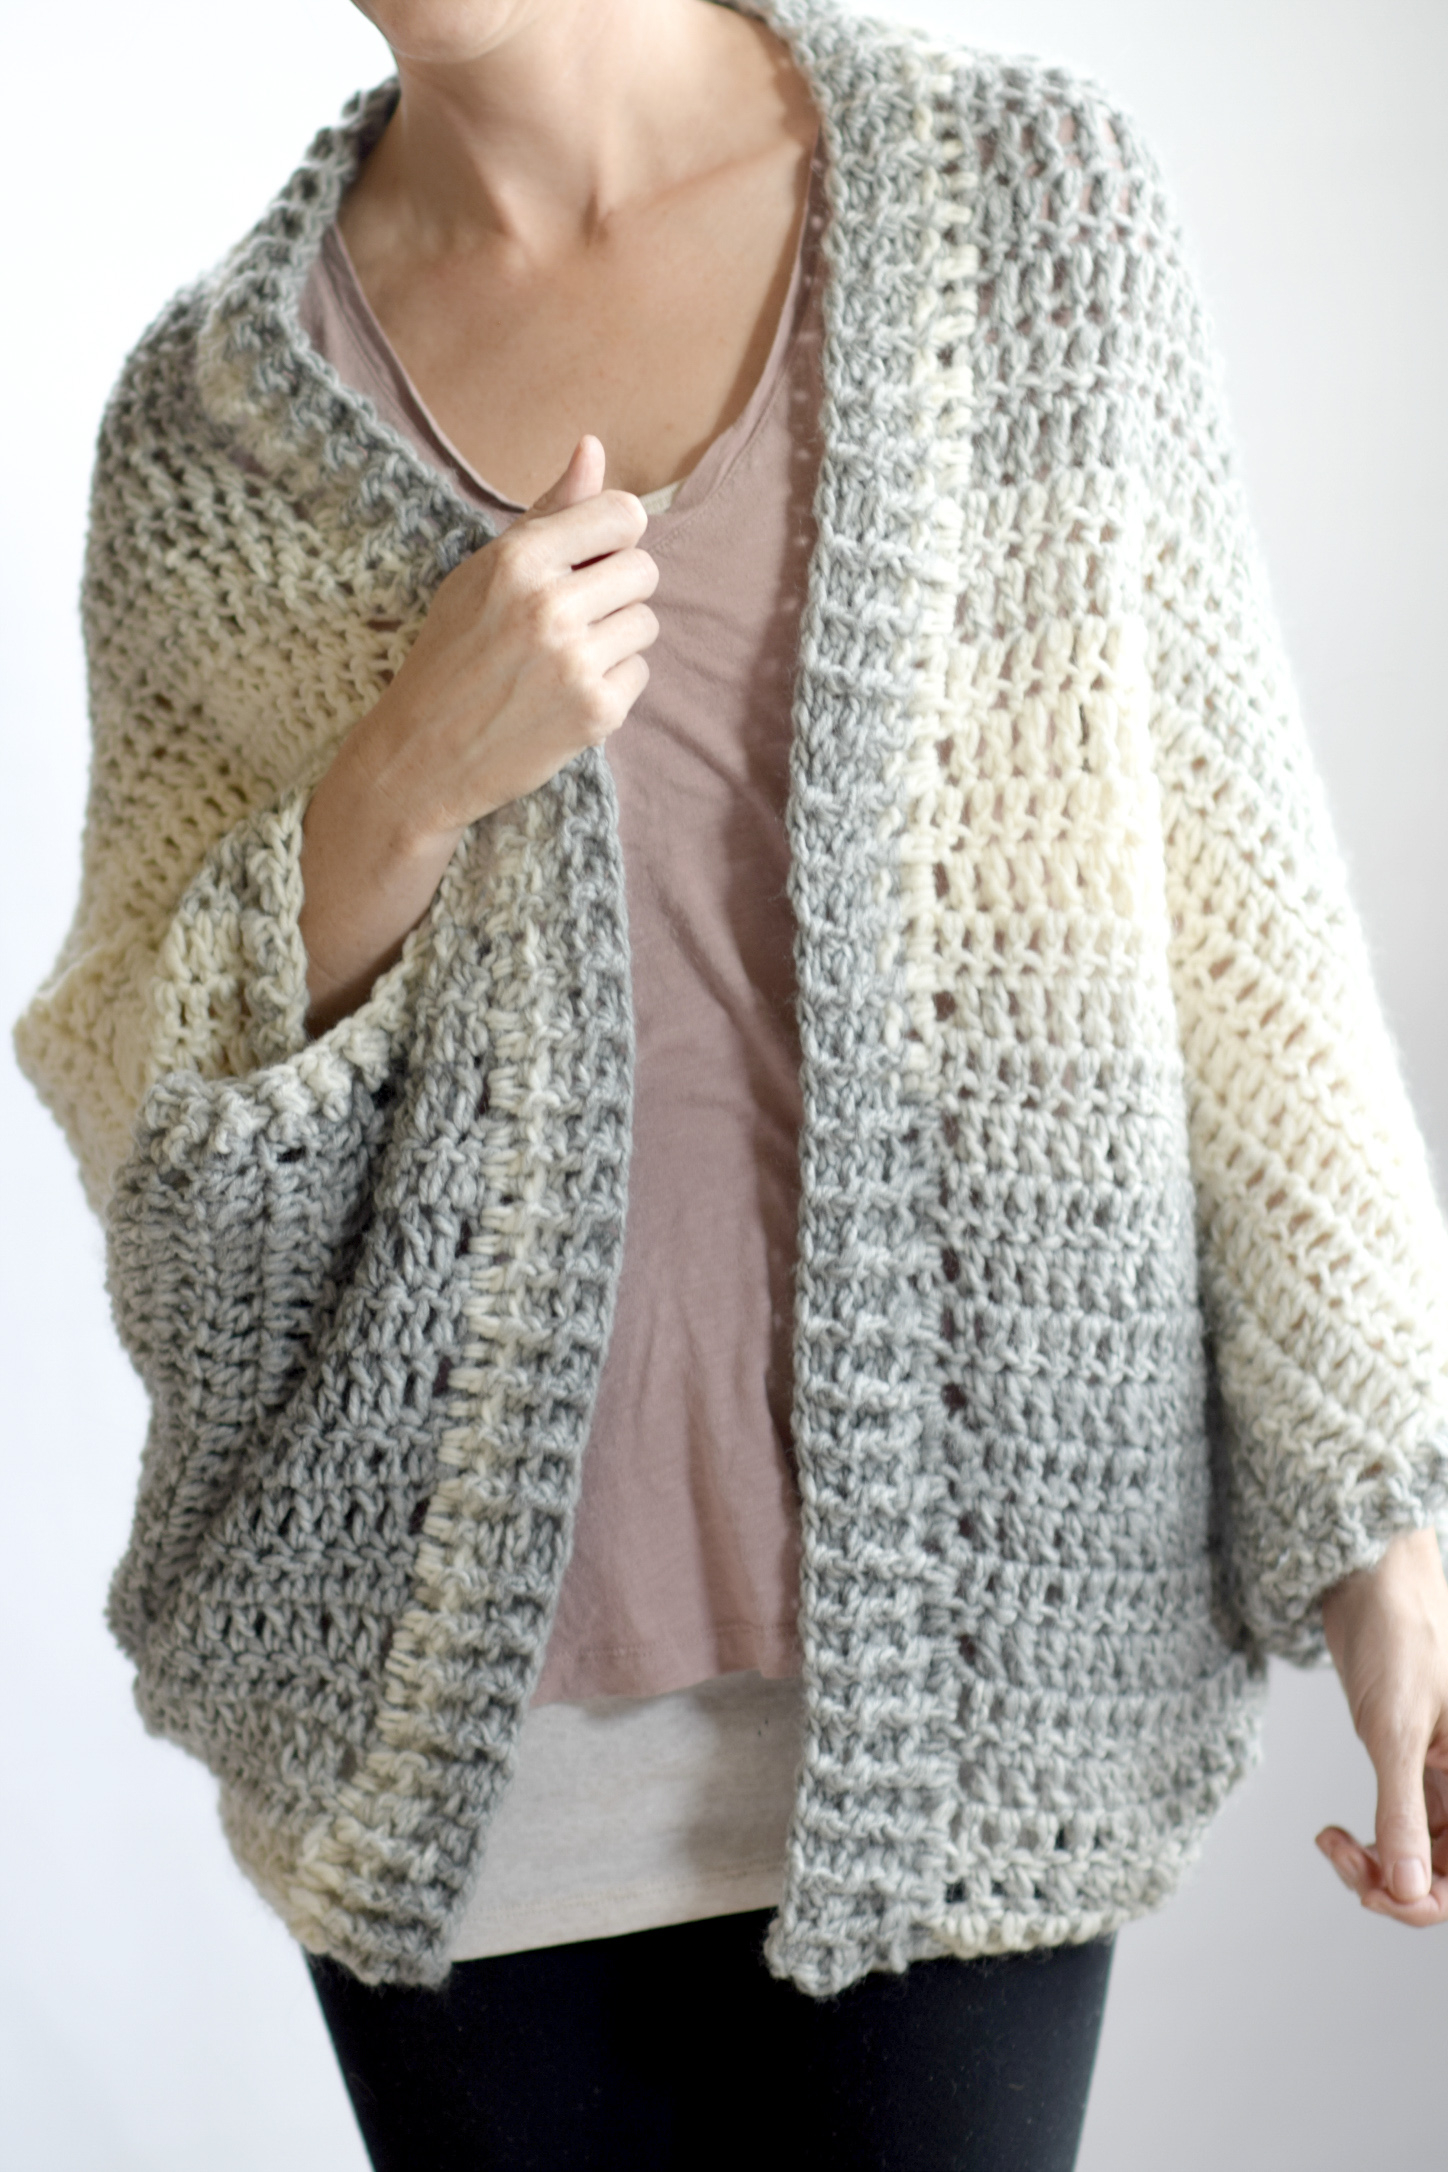 Crochet Shrug Plus Size Pattern Done In A Day Quick Shrug Crochet Pattern Mama In A Stitch